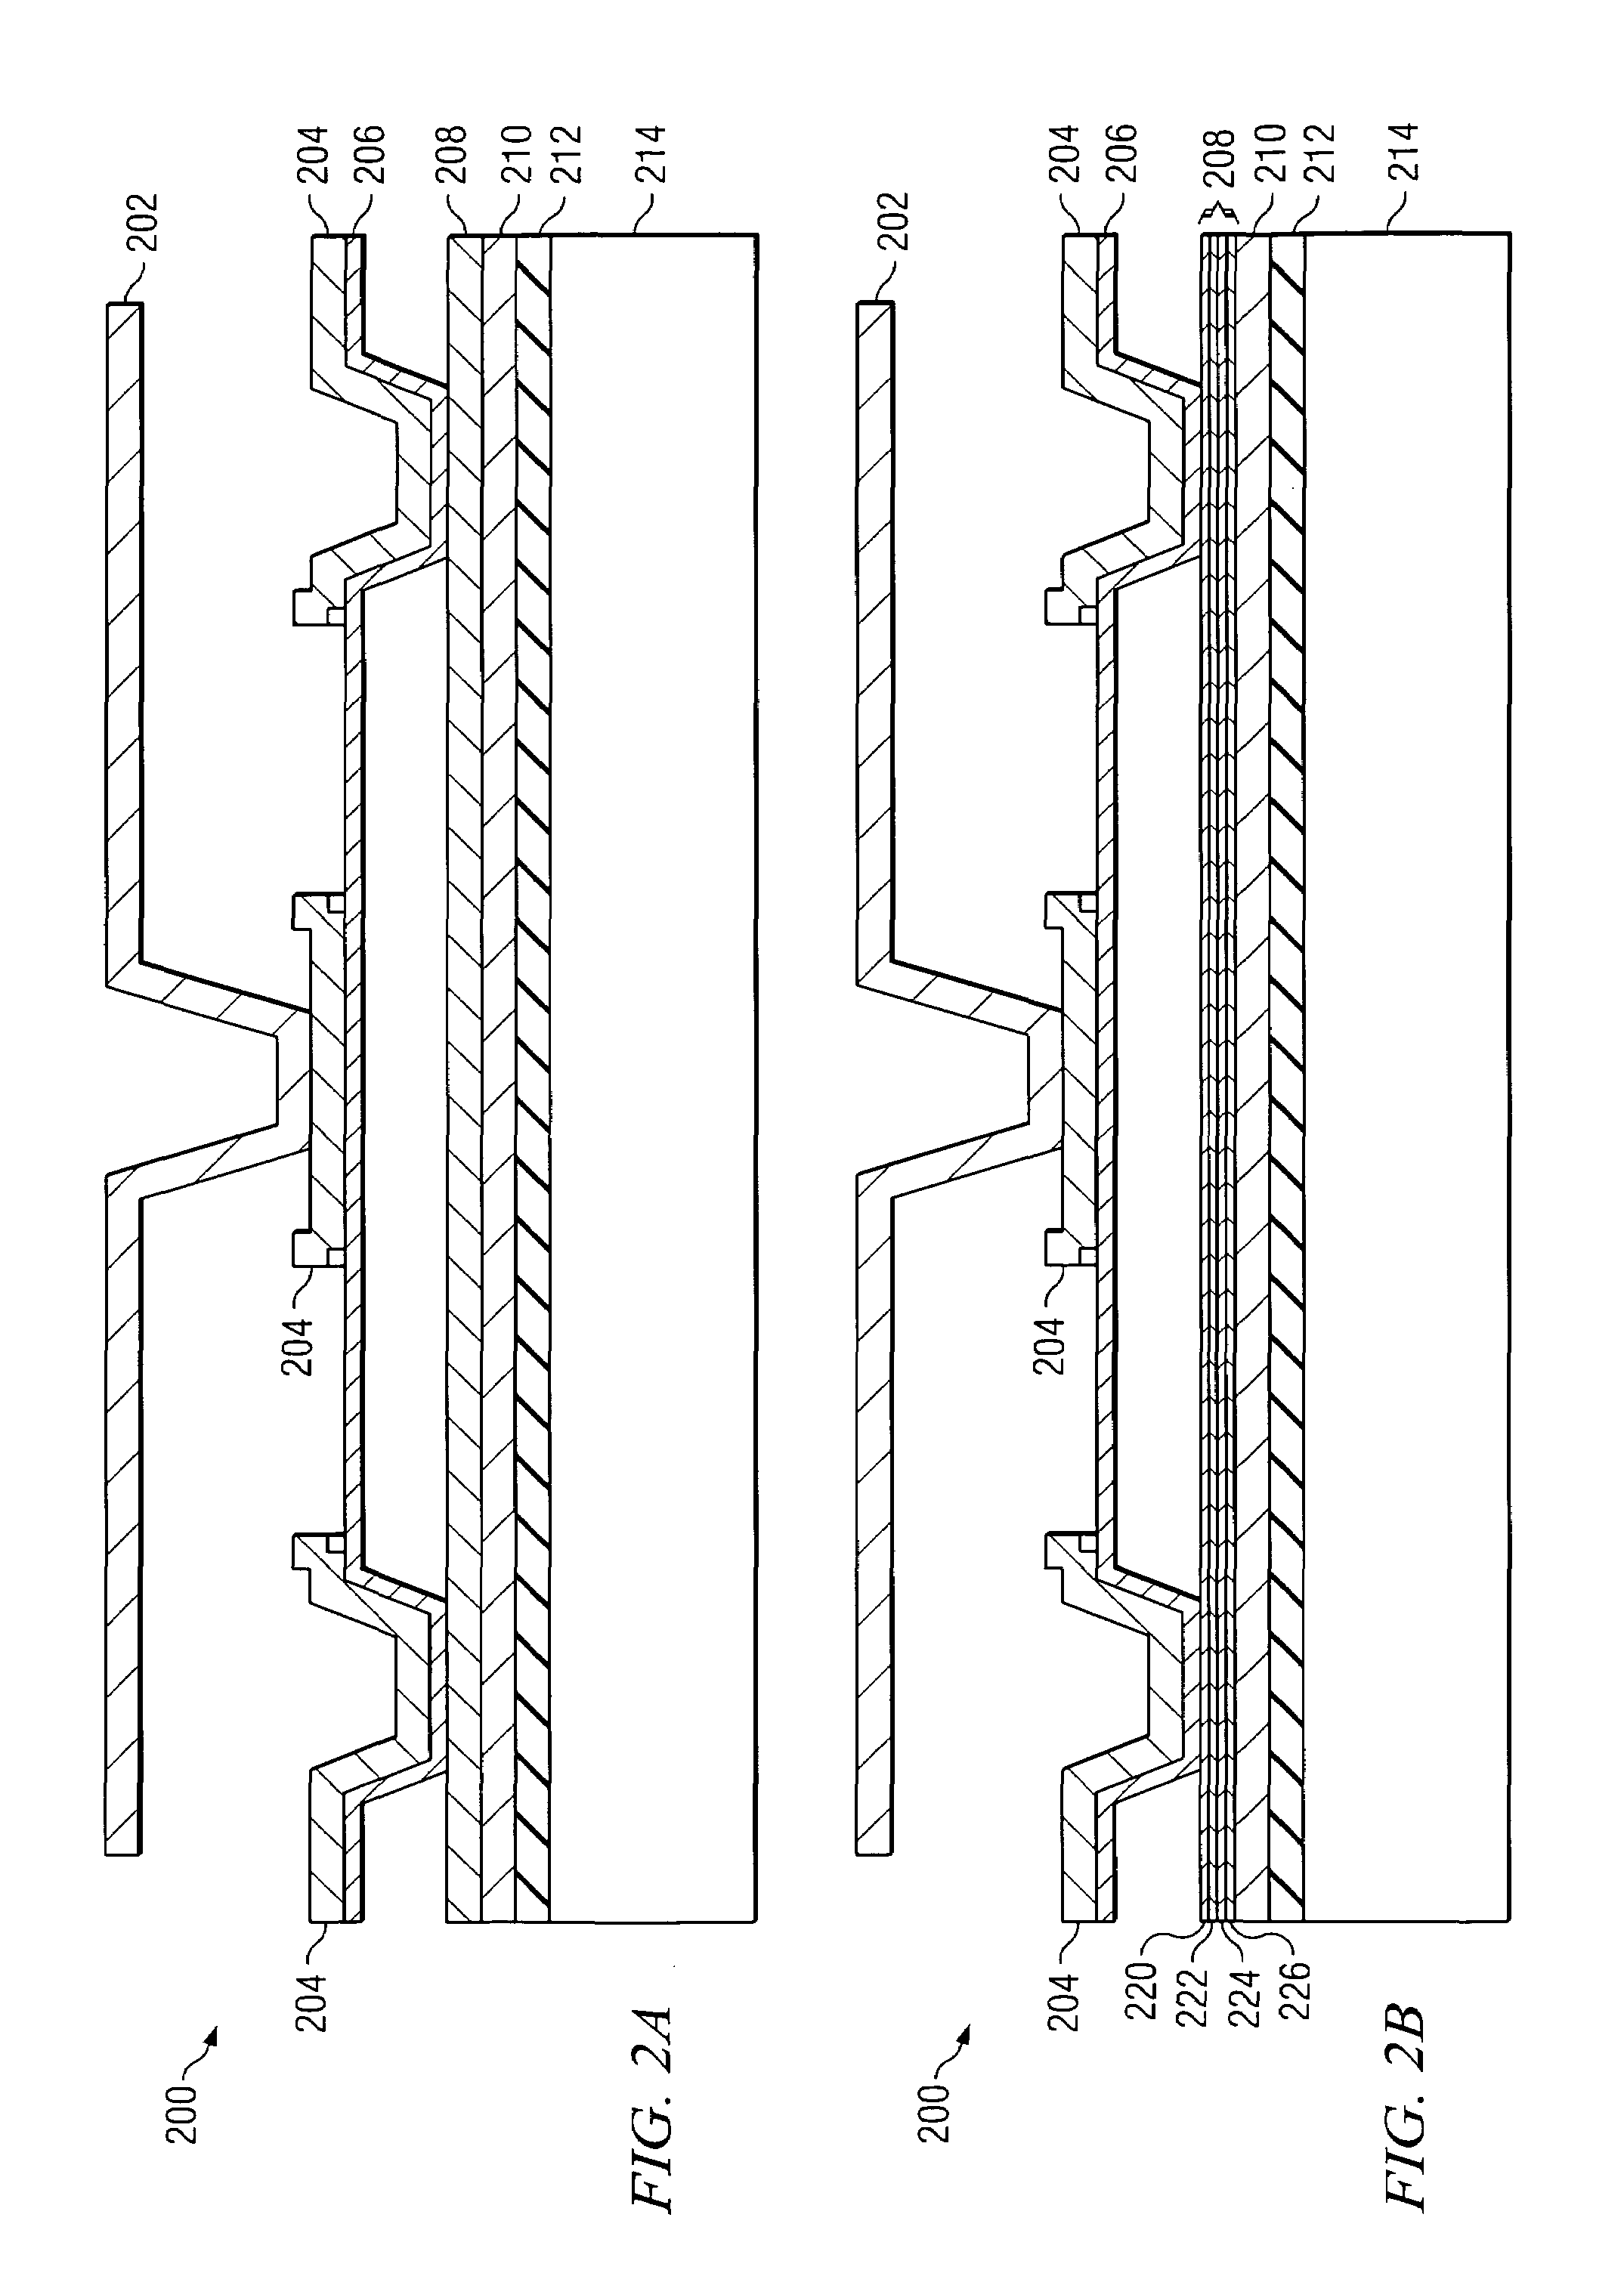 Digital micro-mirror device having improved contrast and method for the same